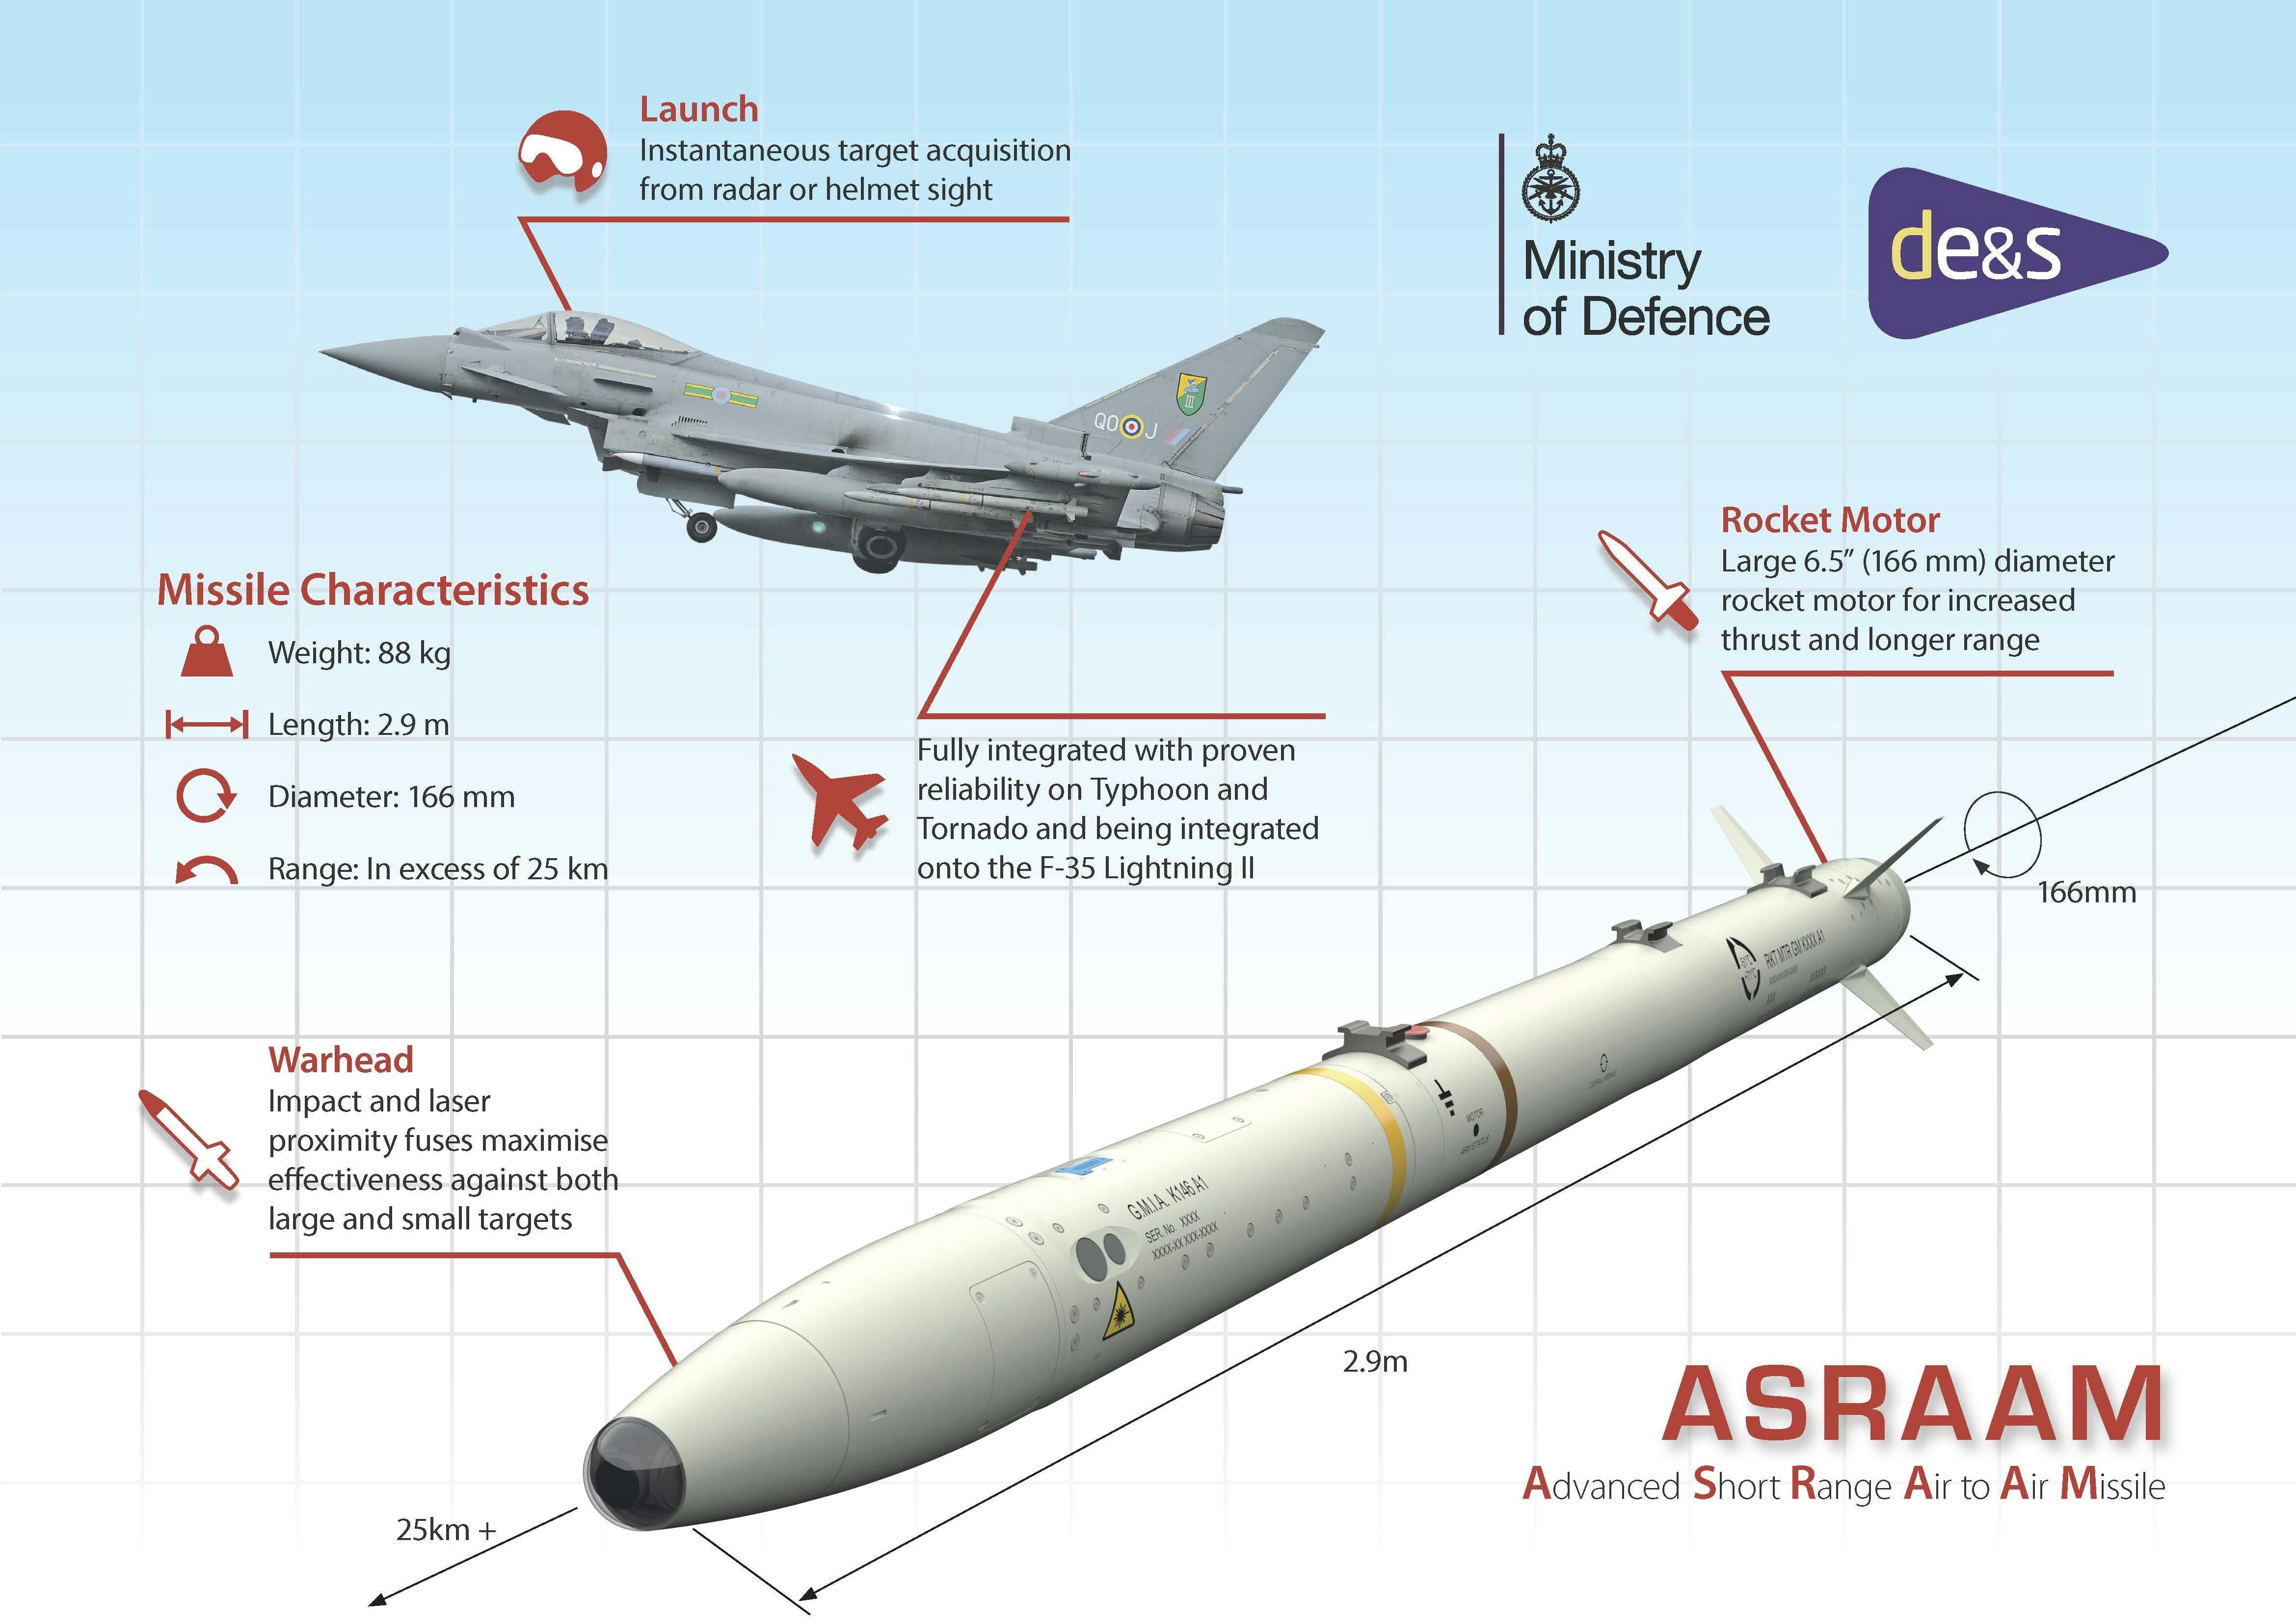 Infographic of the ASRAAM missile. The Ministry of Defence (MOD) has awarded a contract worth around £184 million to ensure the UKs new supersonic stealth combat aircraft will continue to be equipped with the latest air-to-air missile. Designed and manufactured in the UK, ASRAAM is an advanced heat-seeking weapon which will give Royal Air Force (RAF) and Royal Navy F-35B Lightning II pilots, operating from land and the UKs two new aircraft carriers, the ability to defeat current and future air adversaries. The new contract will see MBDA manufacture an additional stockpile of an updated version of the weapon, allowing F-35 combat jets to use the missile beyond 2022. Work to integrate the new missile onto the UKs F-35 fleet will be carried out under a separate contract.